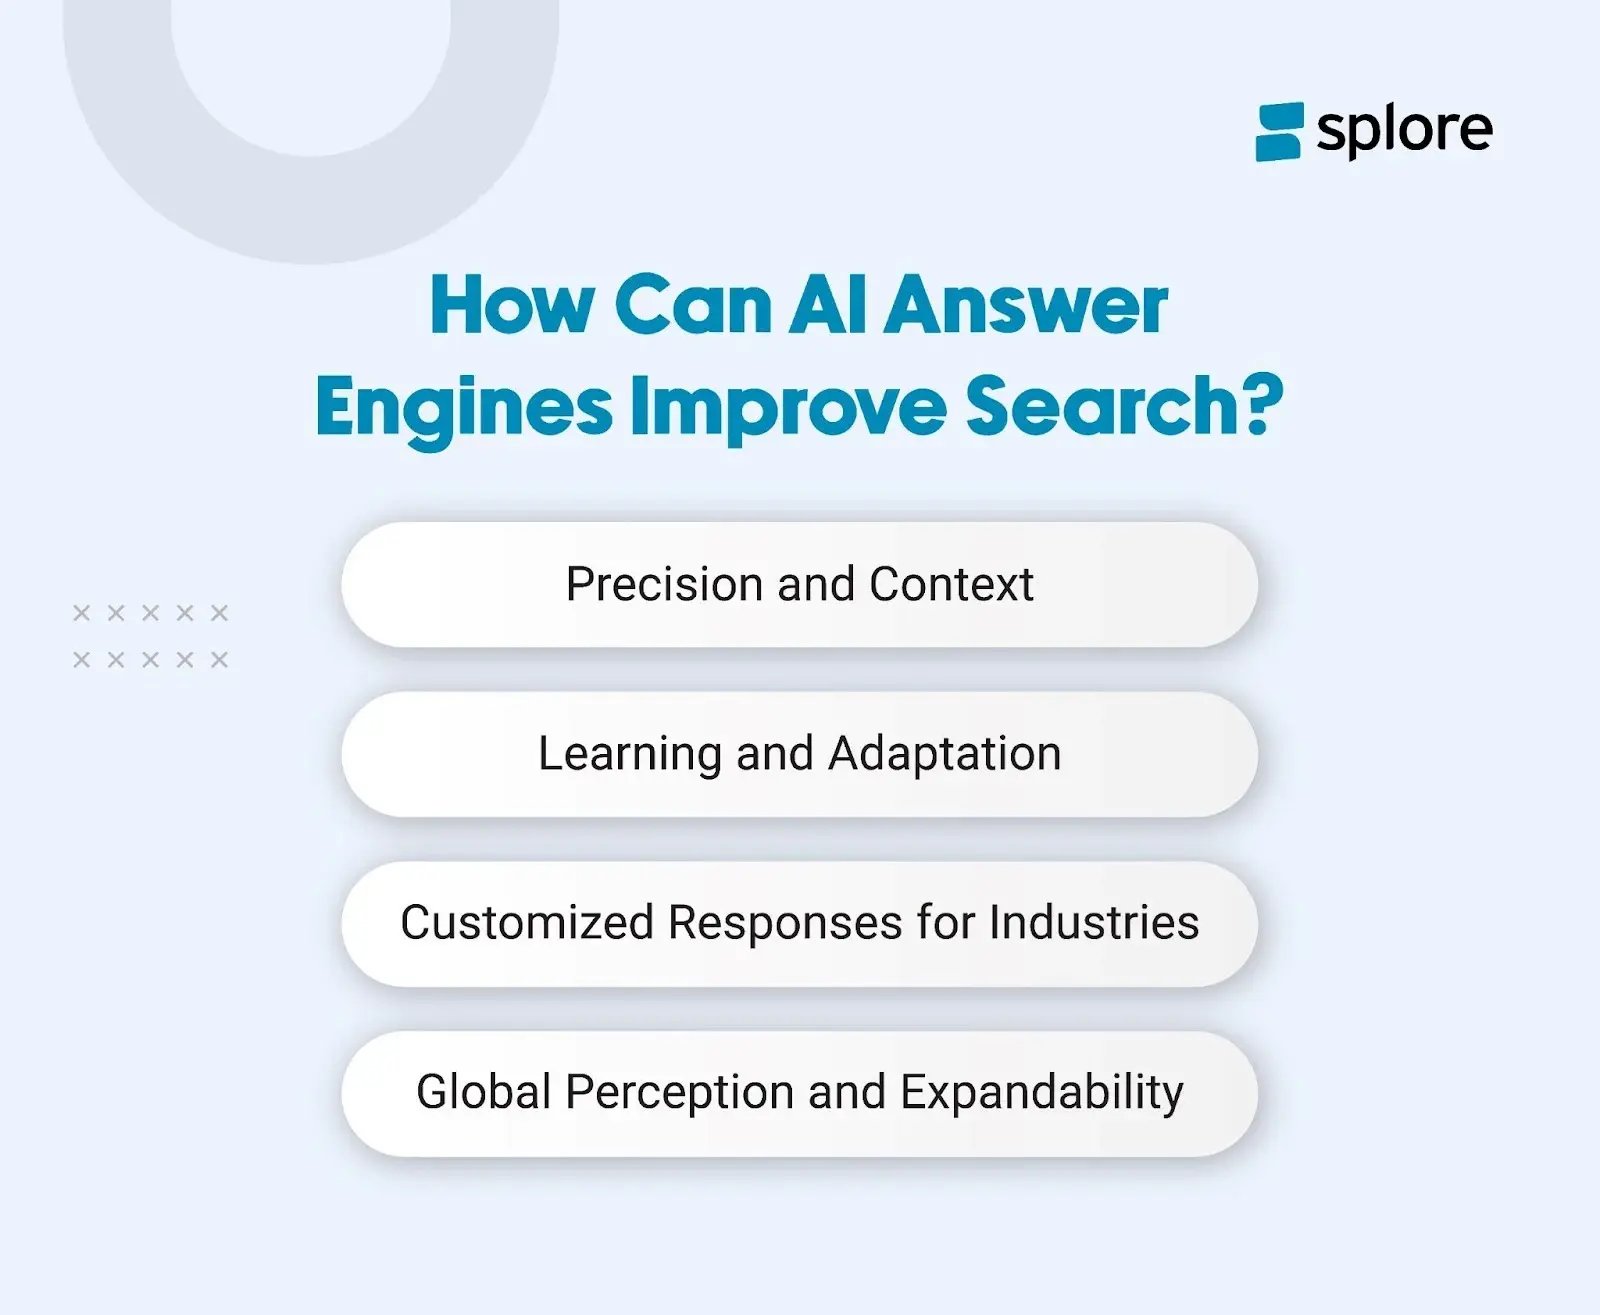 How Can AI Answer Engines Improve Search